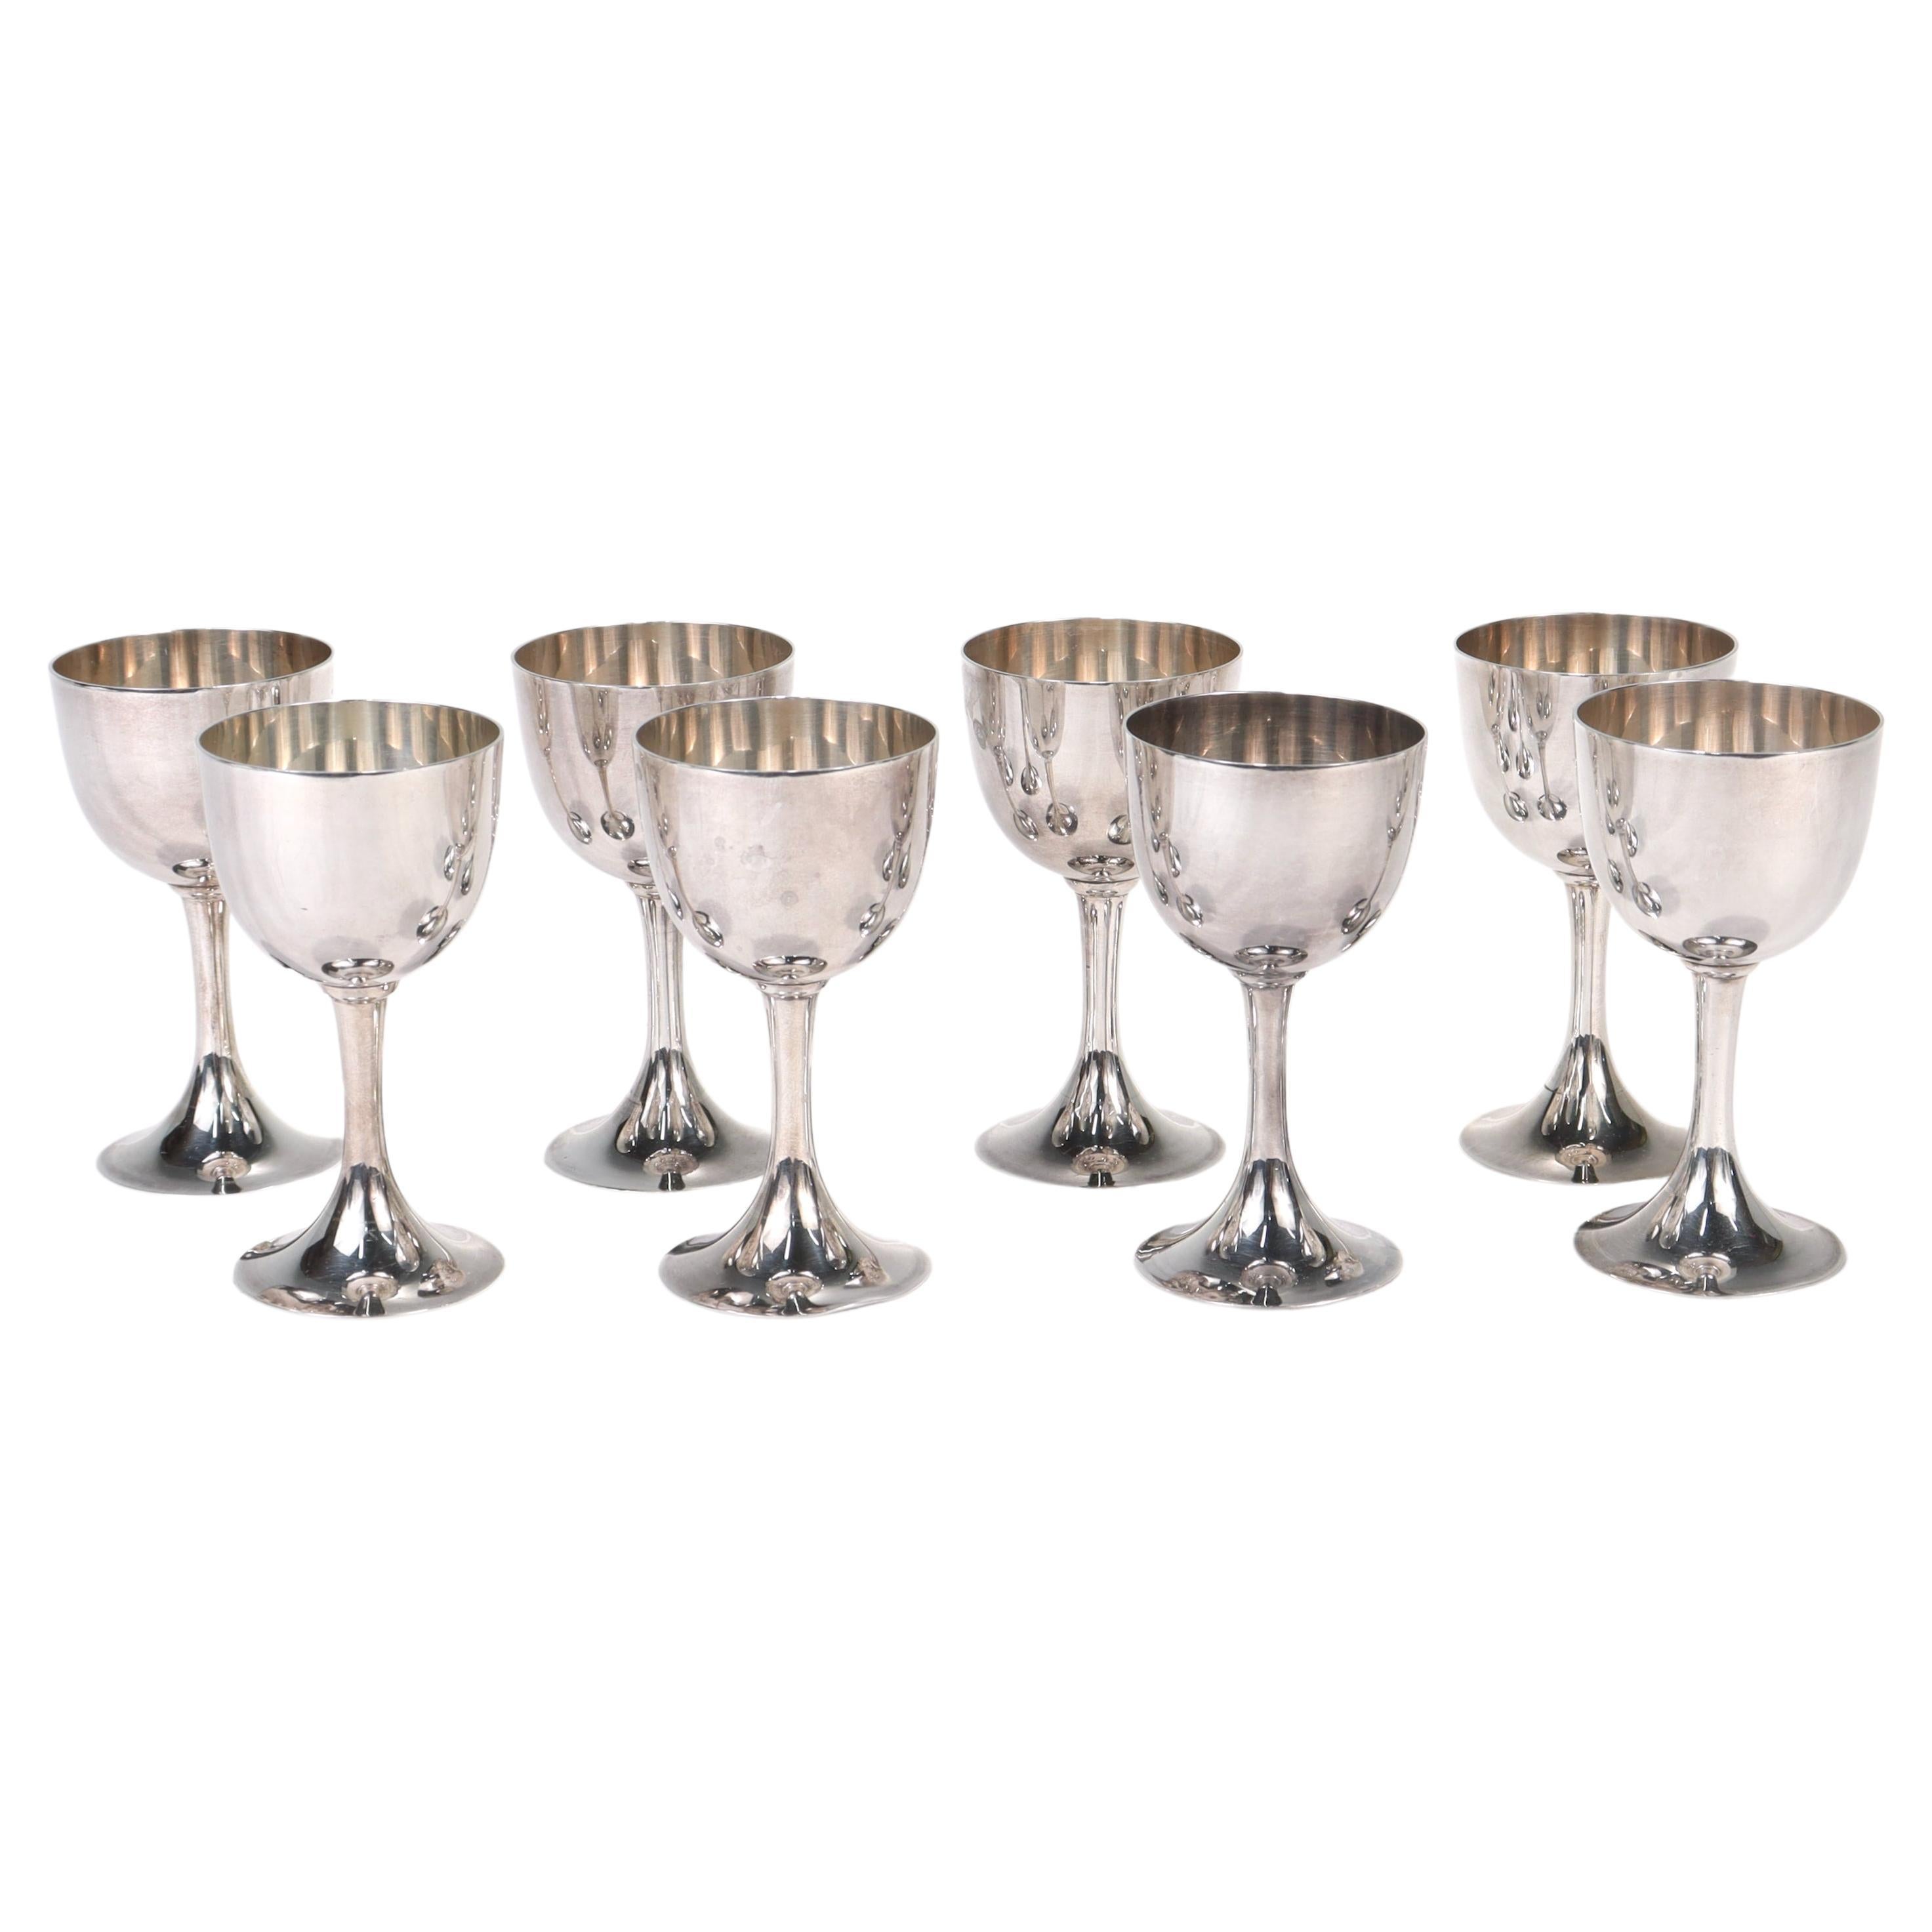 Set of 8 Old or Antique Japanese .950 Sterling Silver Cordials For Sale